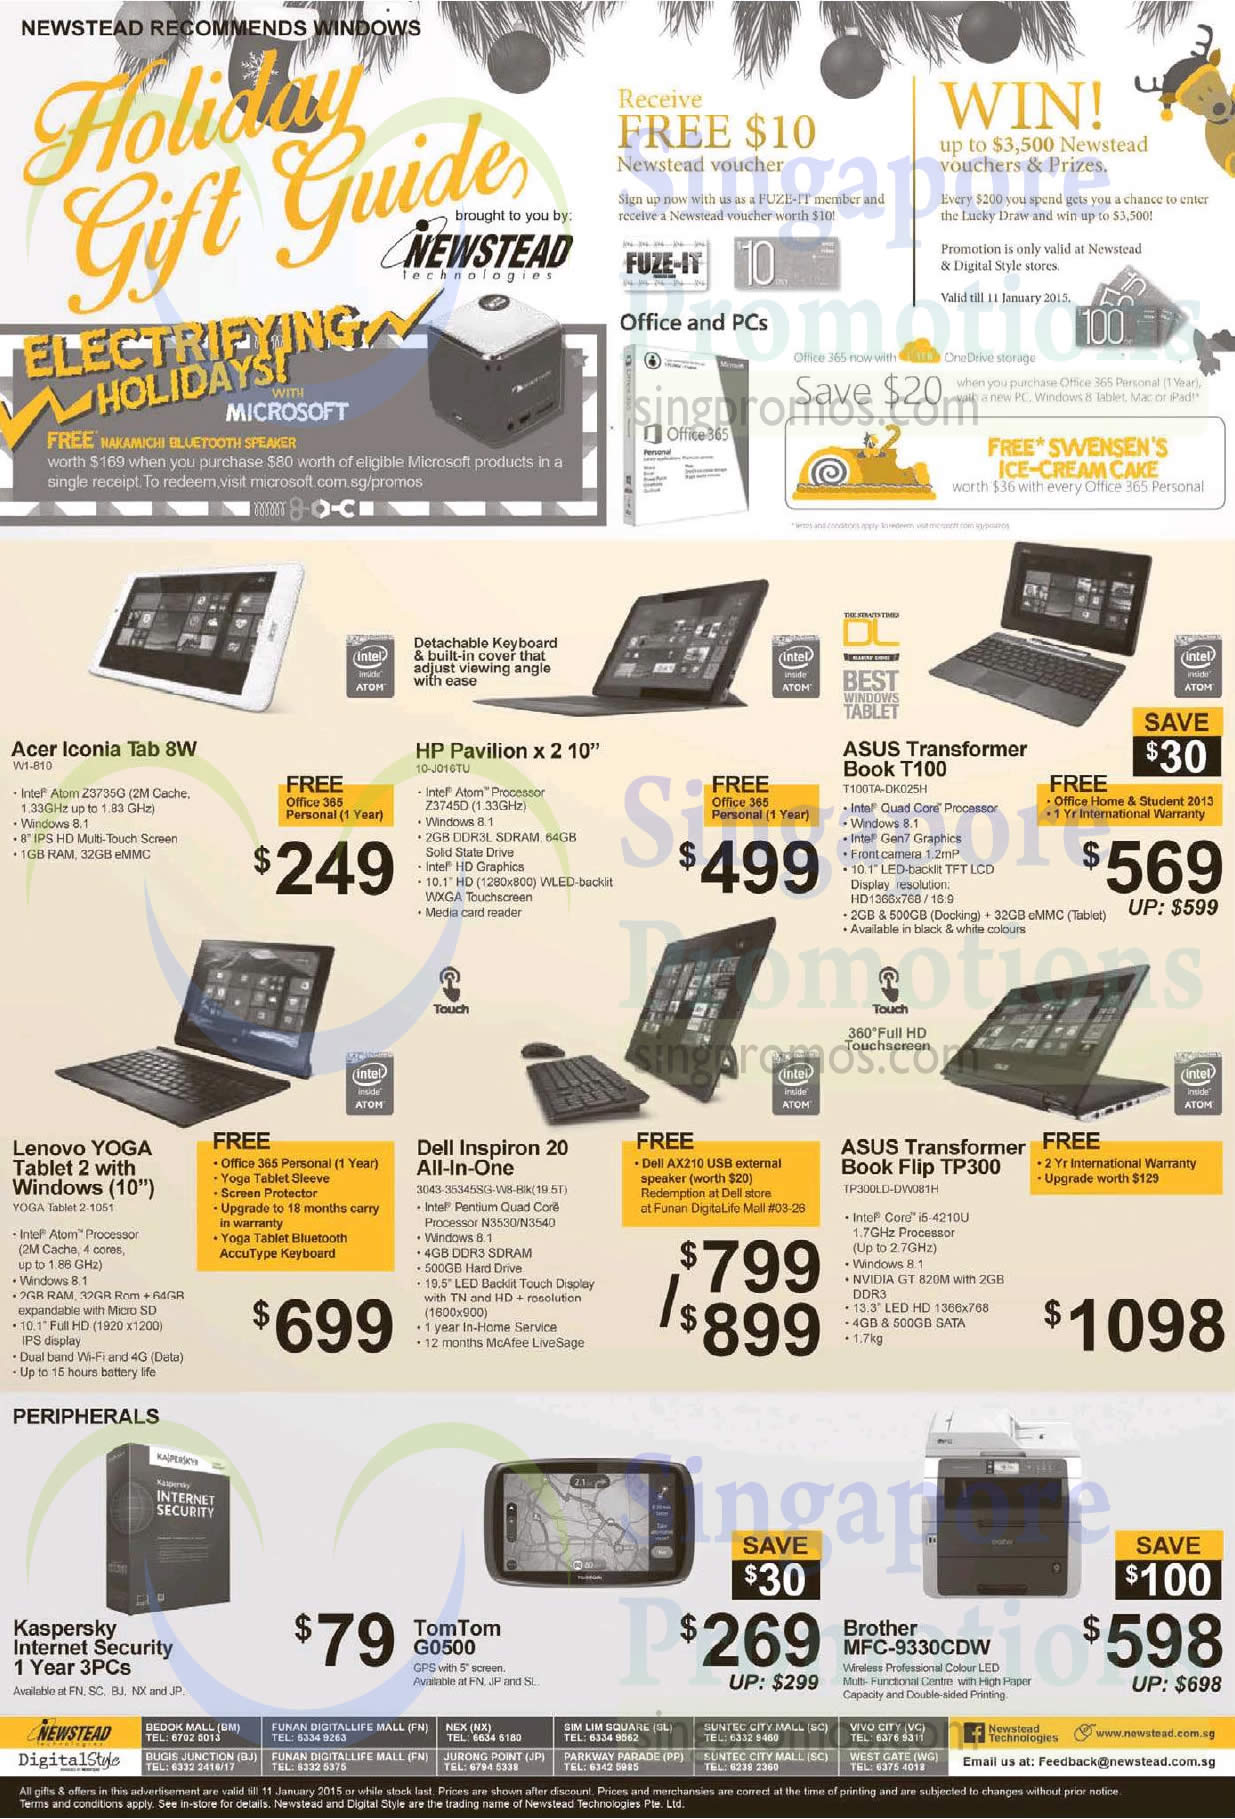 Featured image for Newstead Notebooks, AIO Desktop PC & Tablet Offers 10 Dec 2014 - 11 Jan 2015